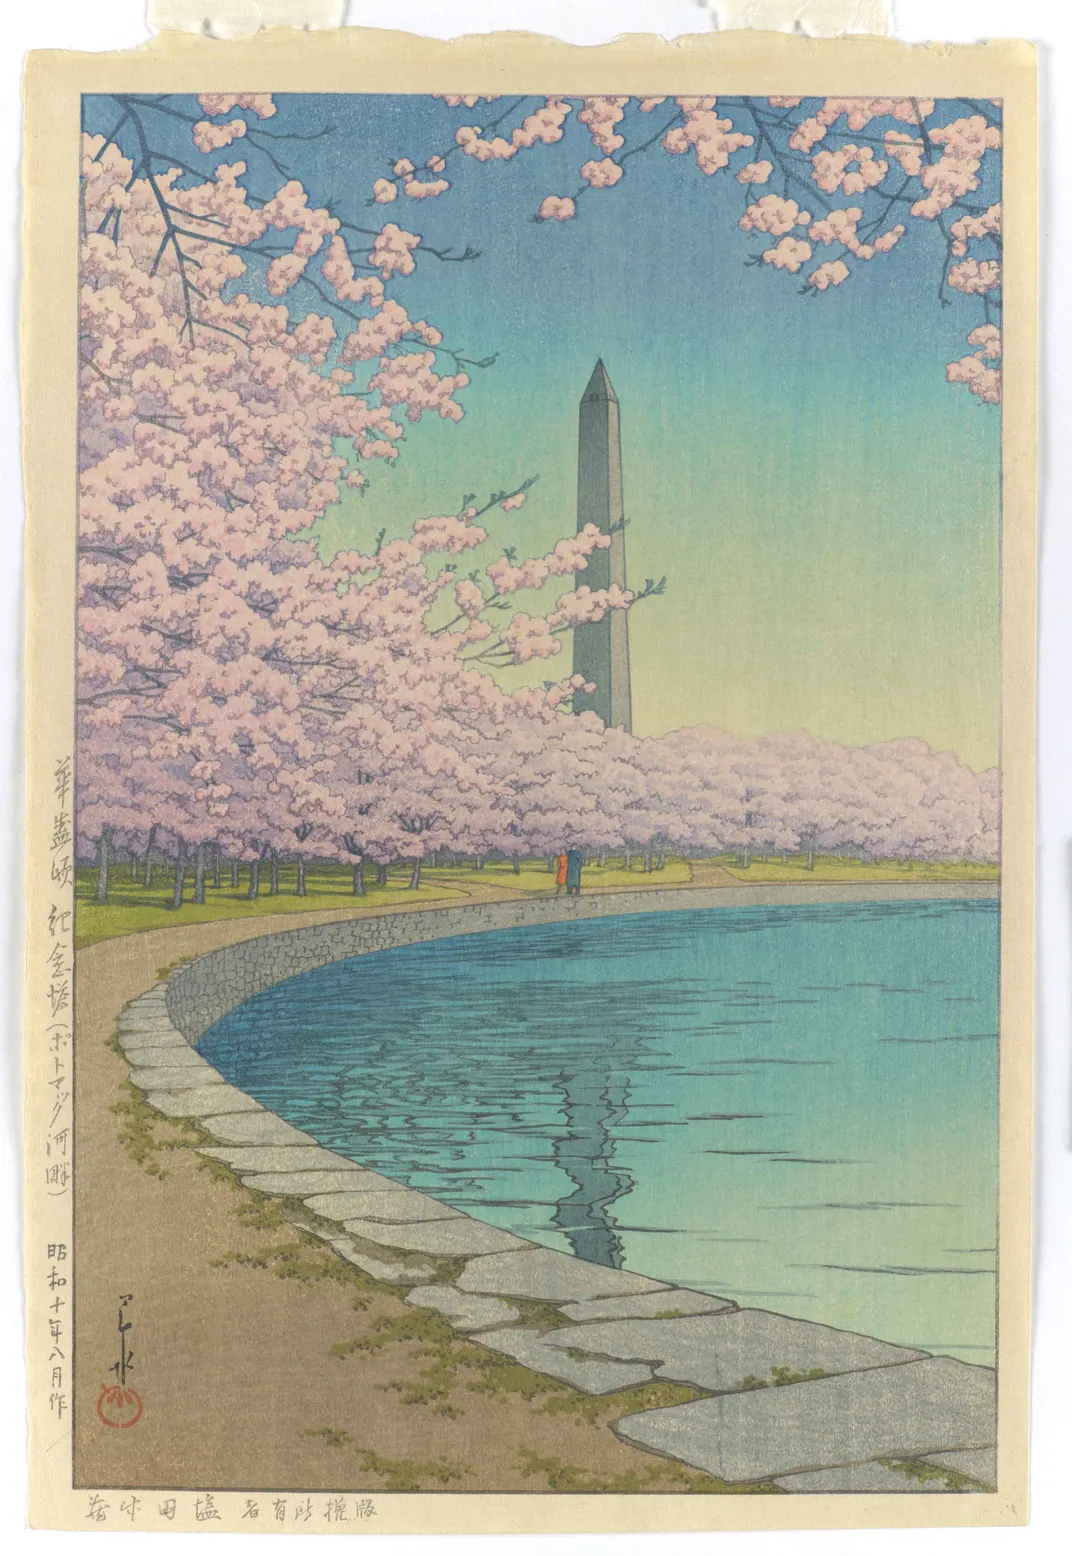 Honor the Tradition of Viewing Cherry Blossoms in These Signature Japanese Works of Art